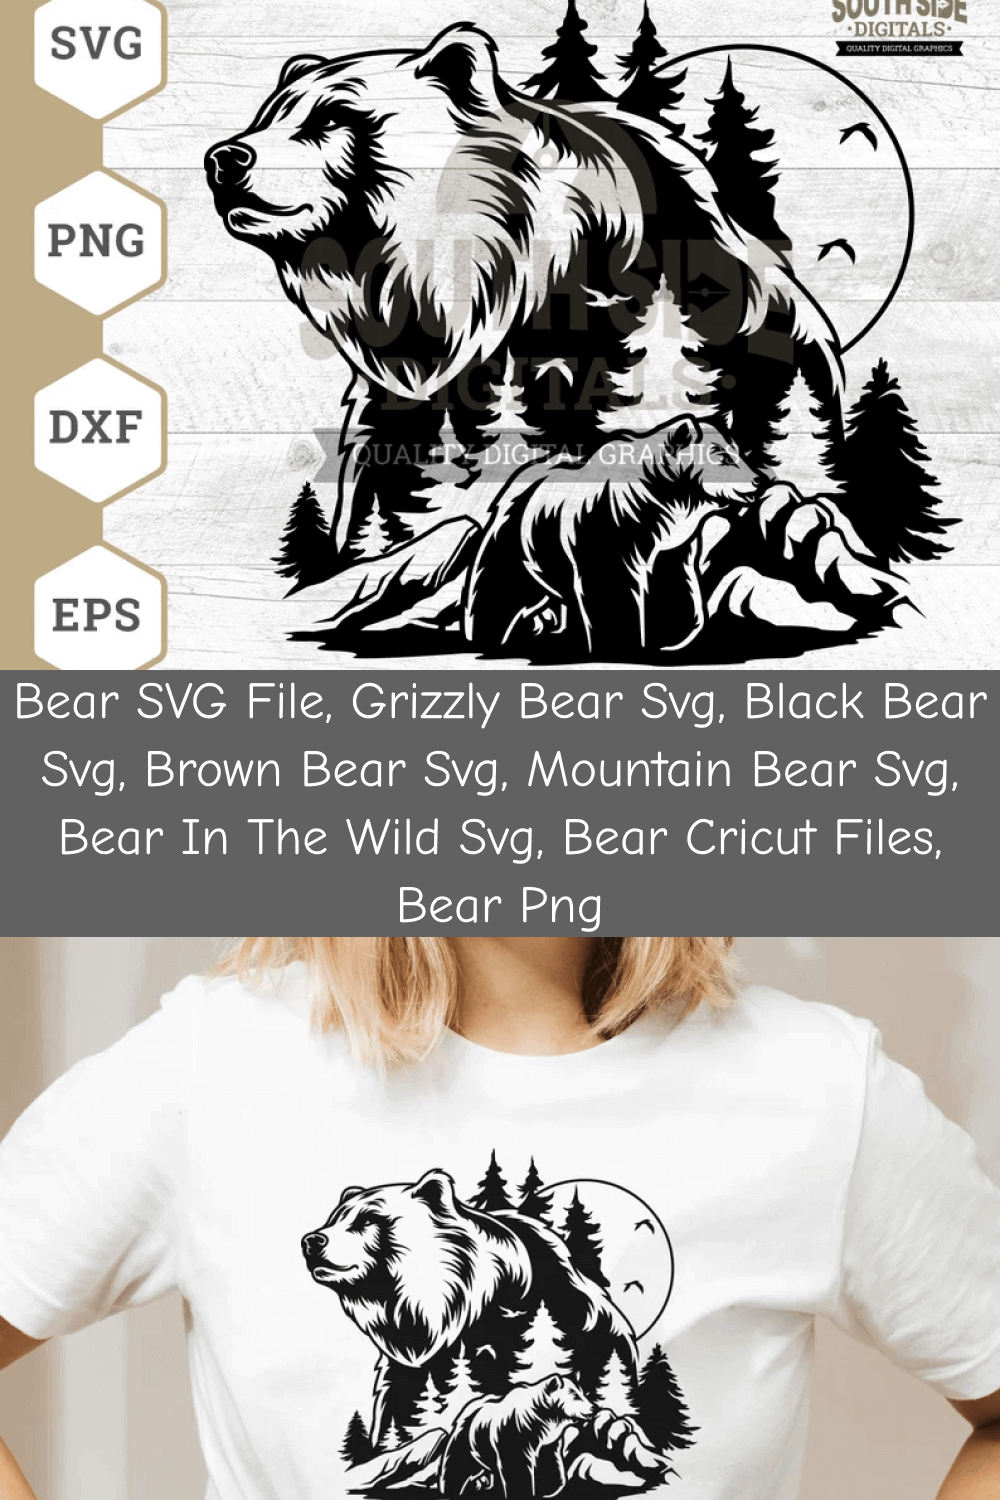 Mountain Bear on the White Background and White T-shirt.